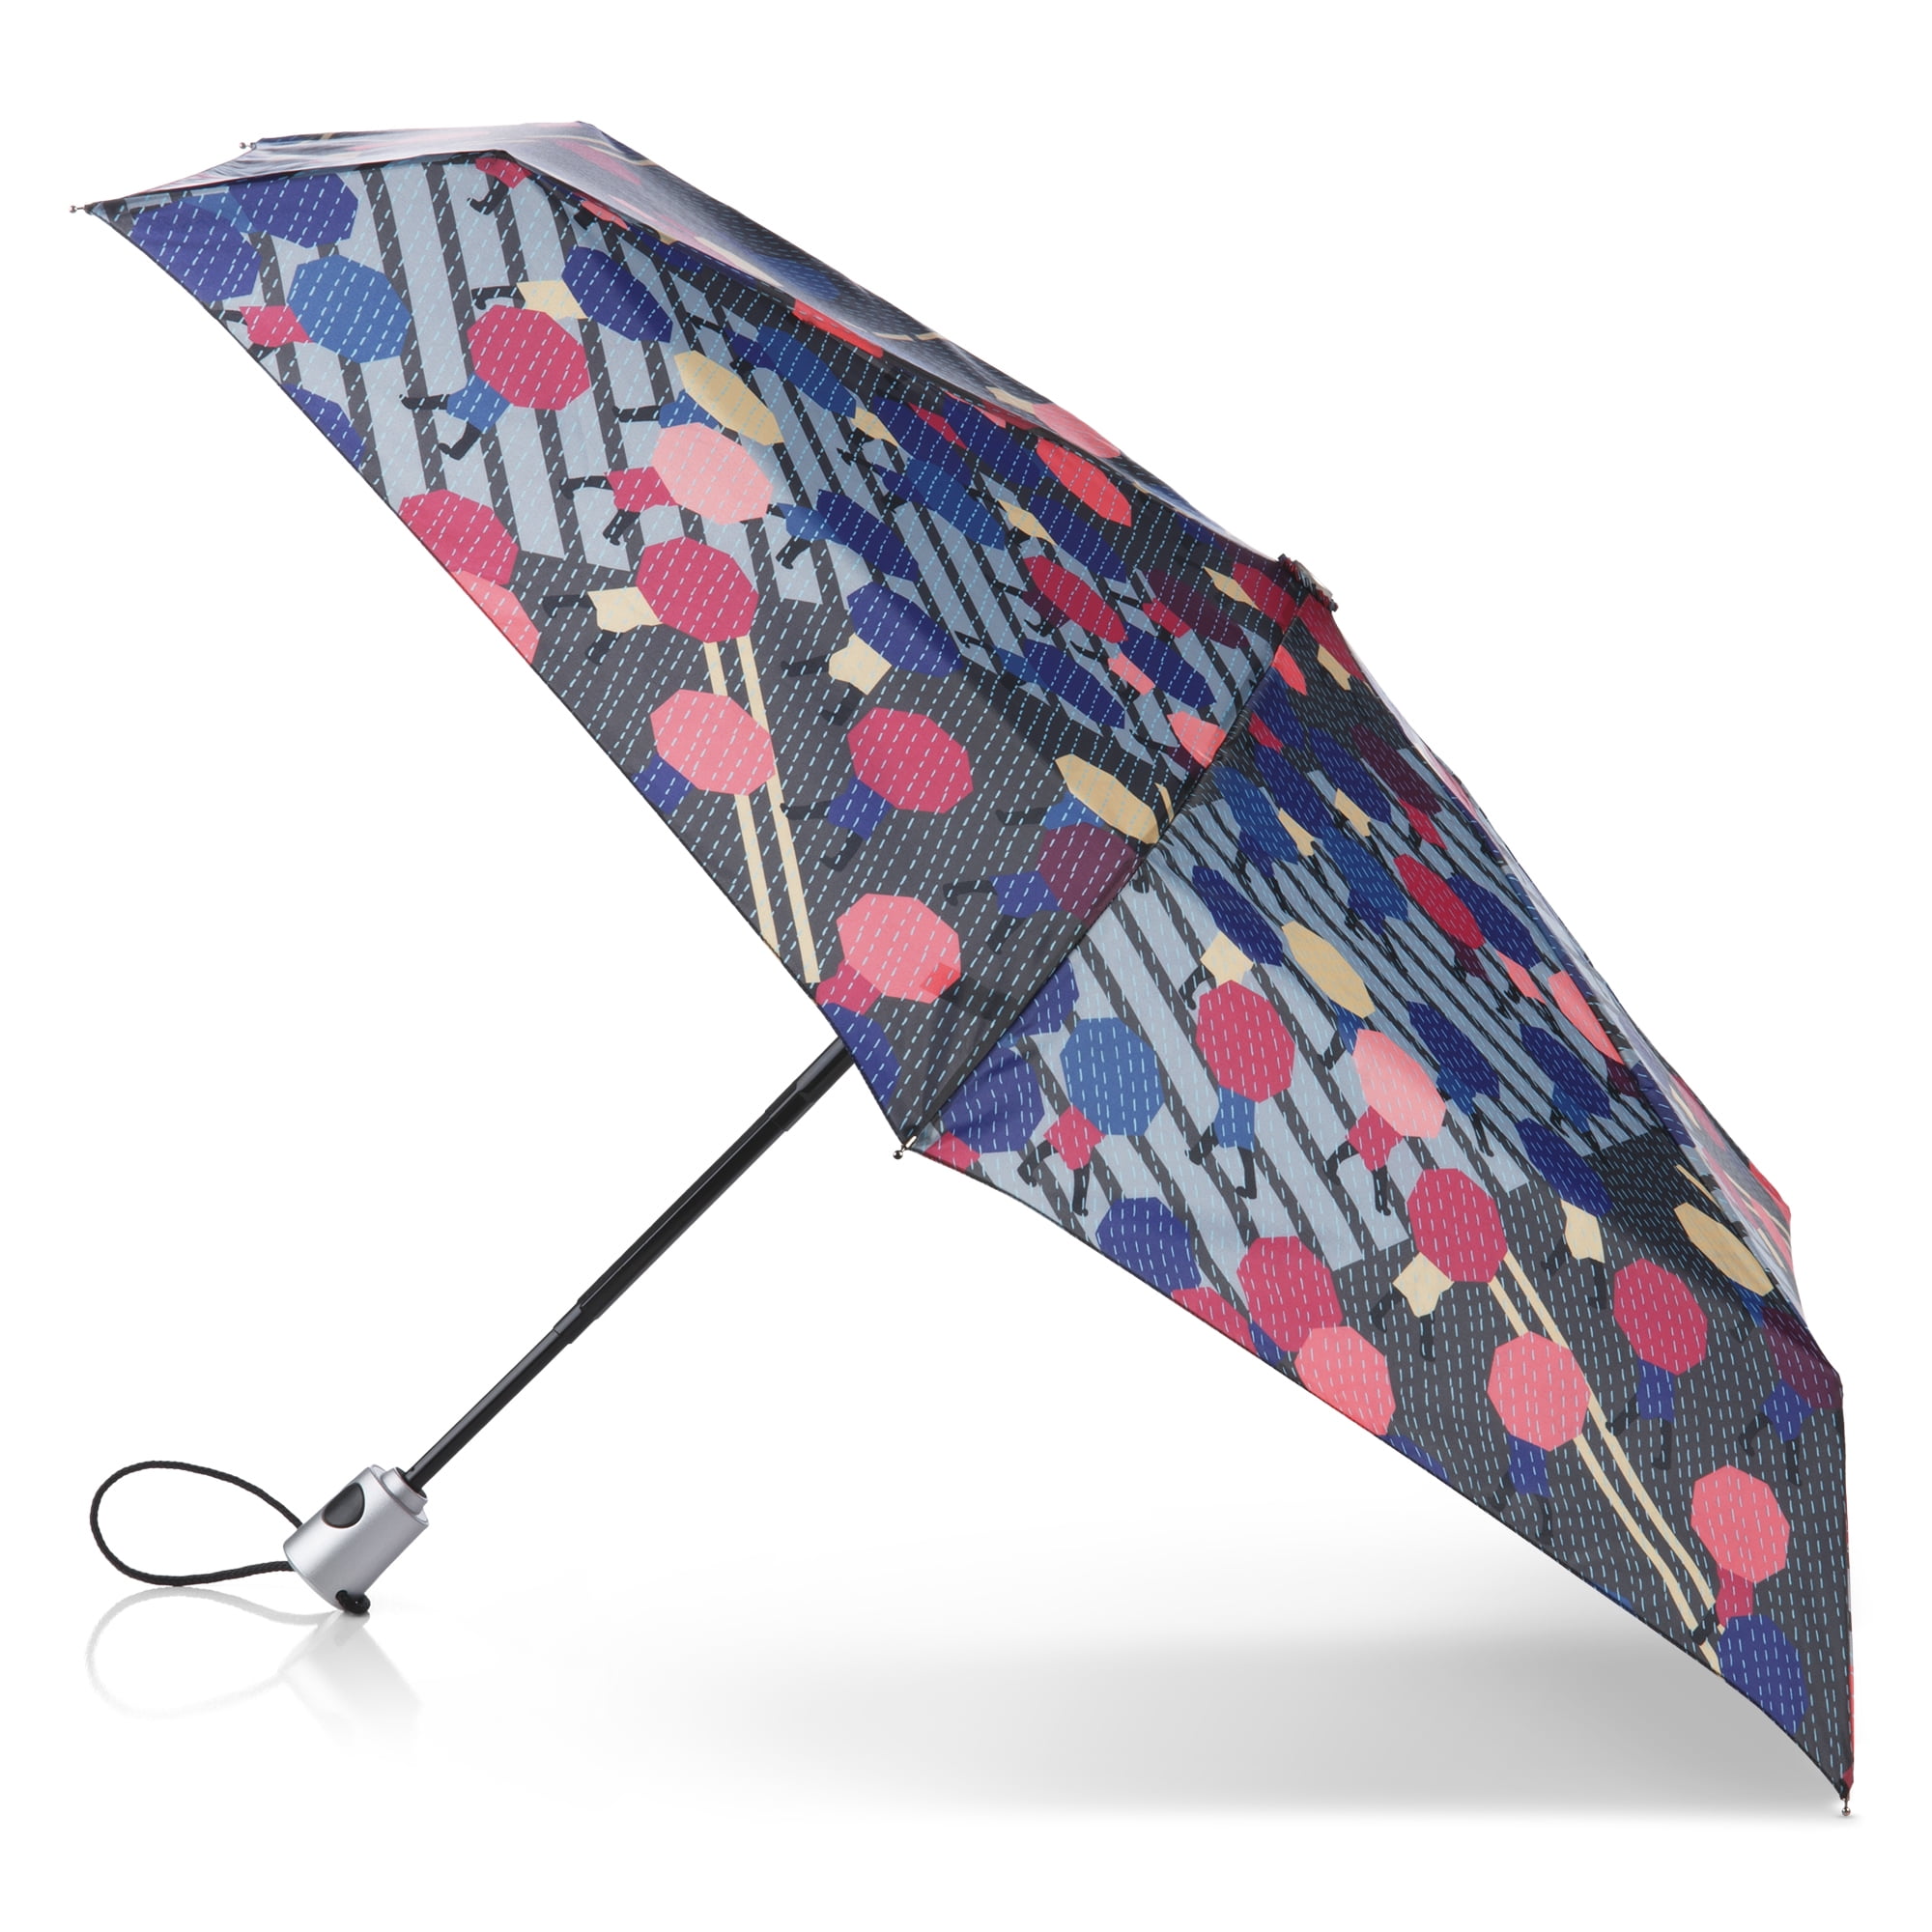 Totes Recycled Canopy One-Touch Auto Open Ultra Compact Mini Travel Umbrella with Carrying Case